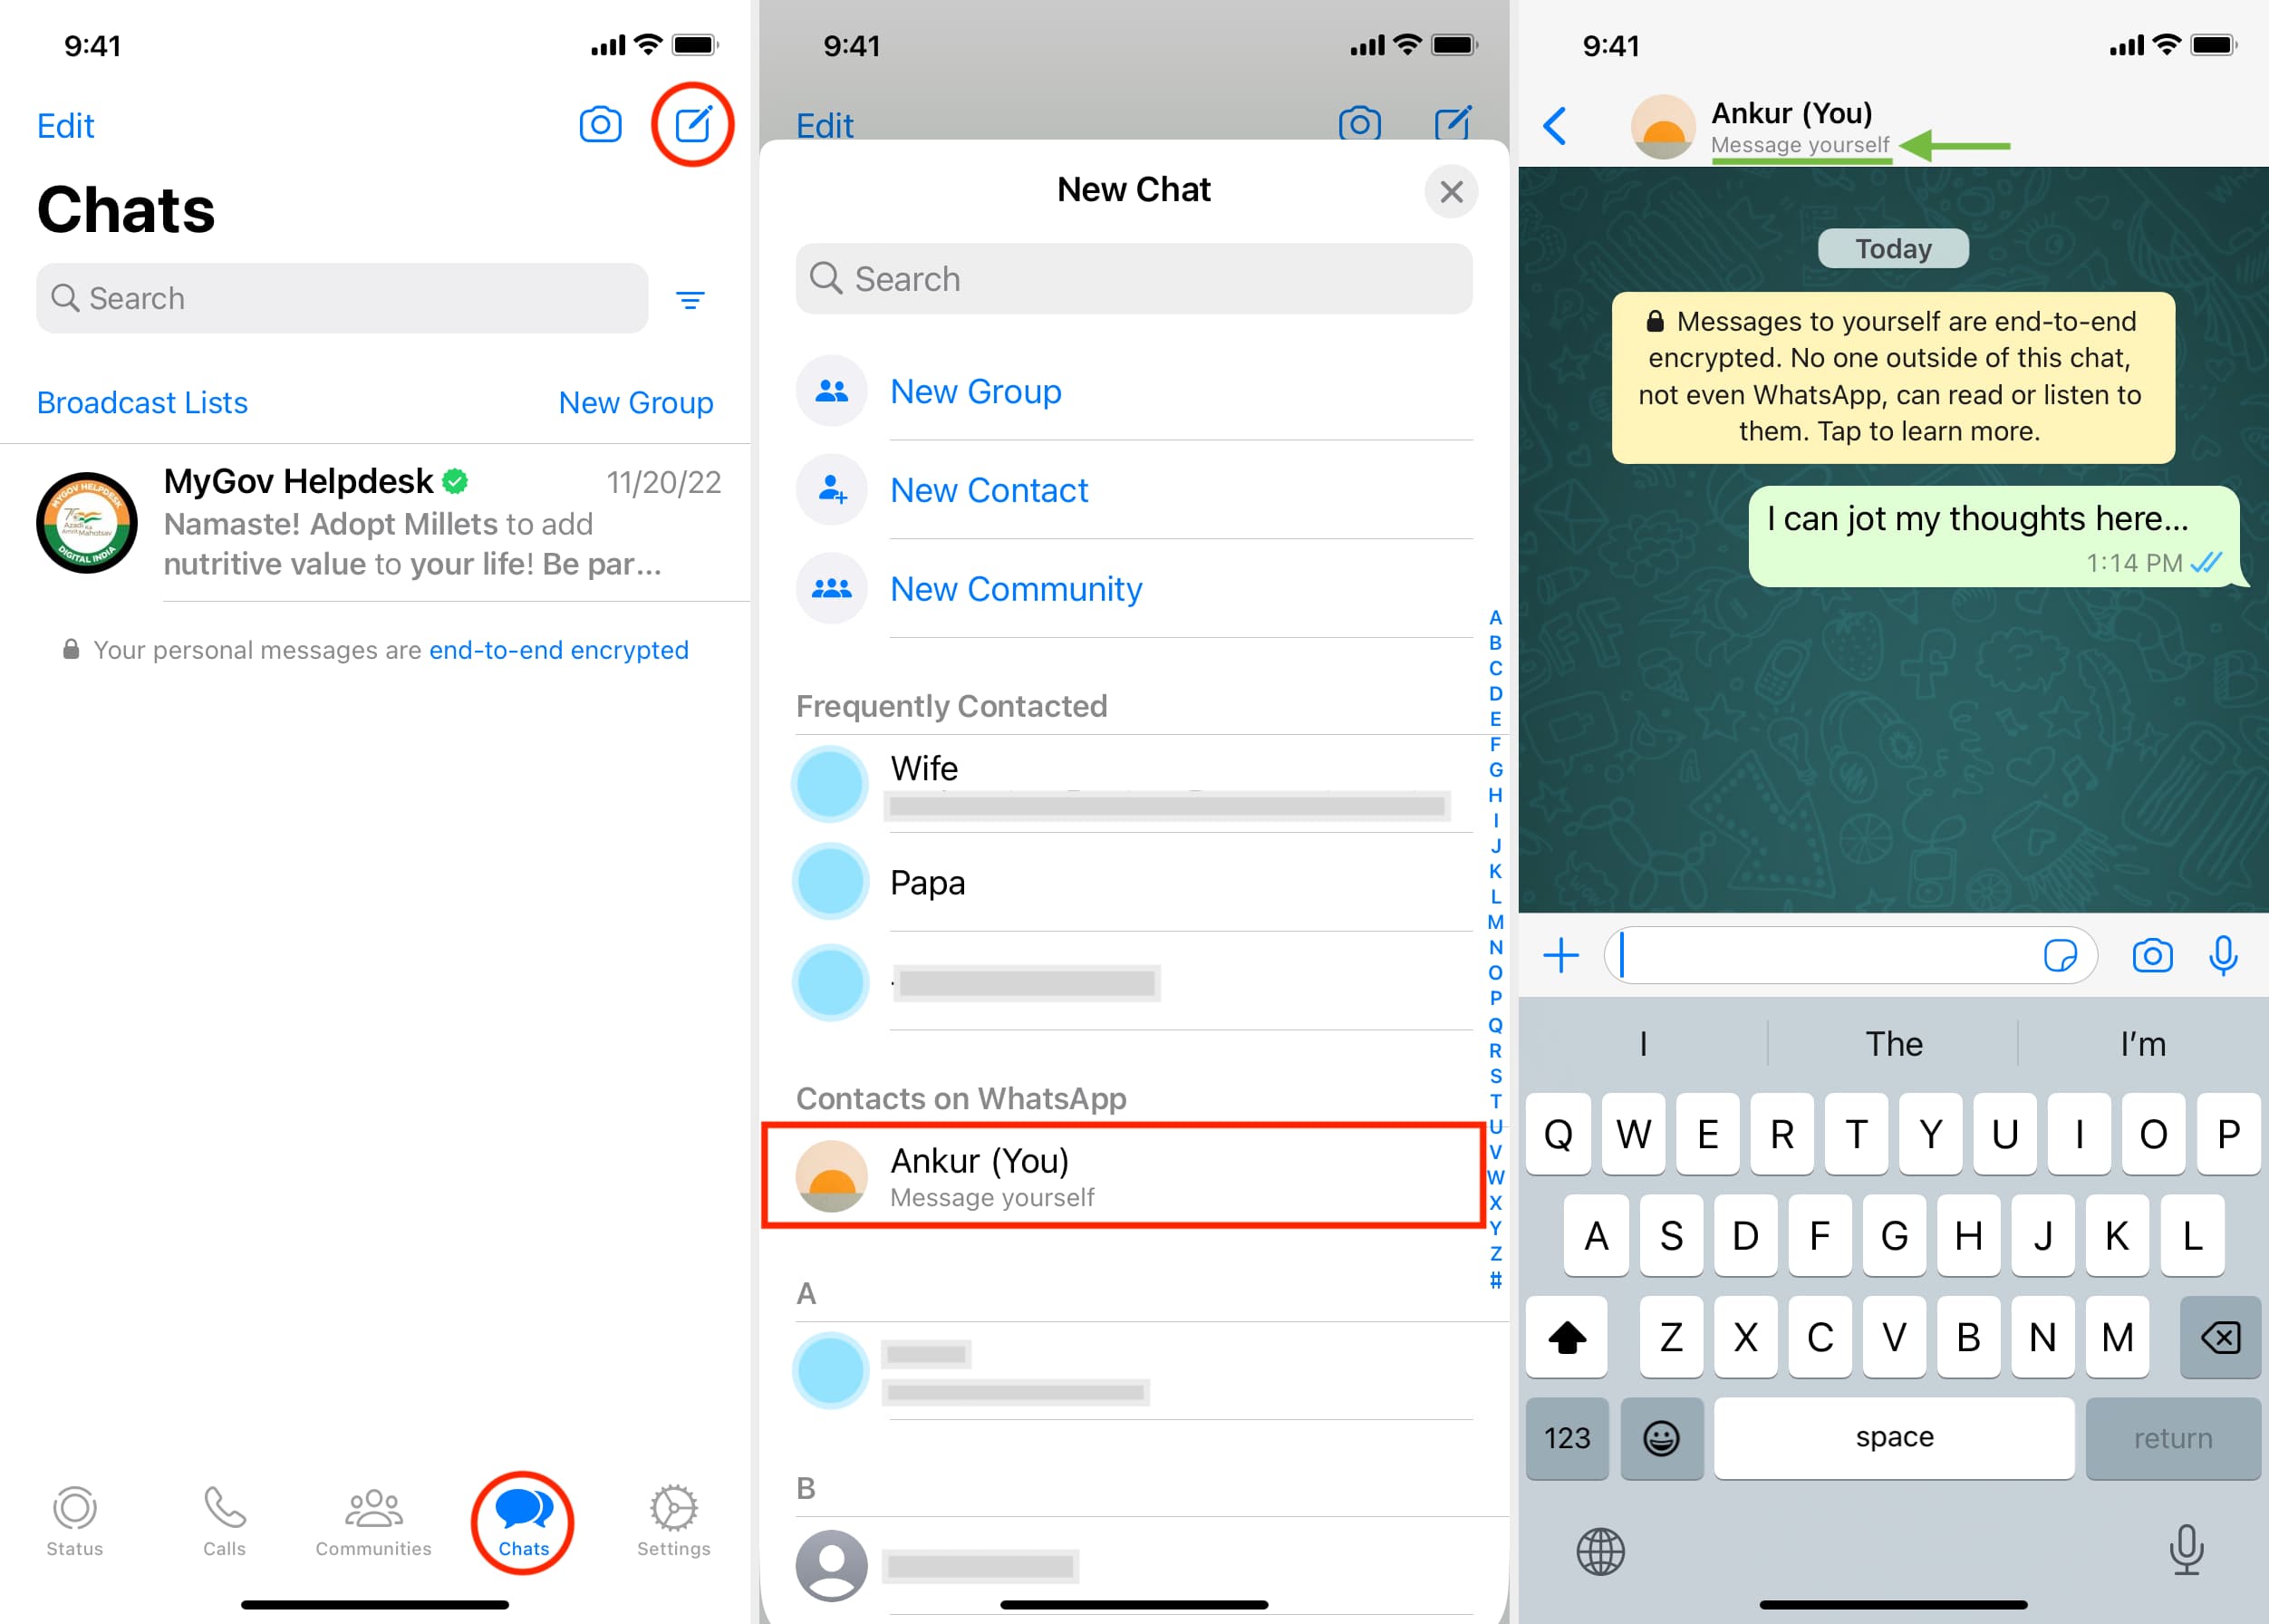 Three screenshots showing how to send message to yourself on WhatsApp